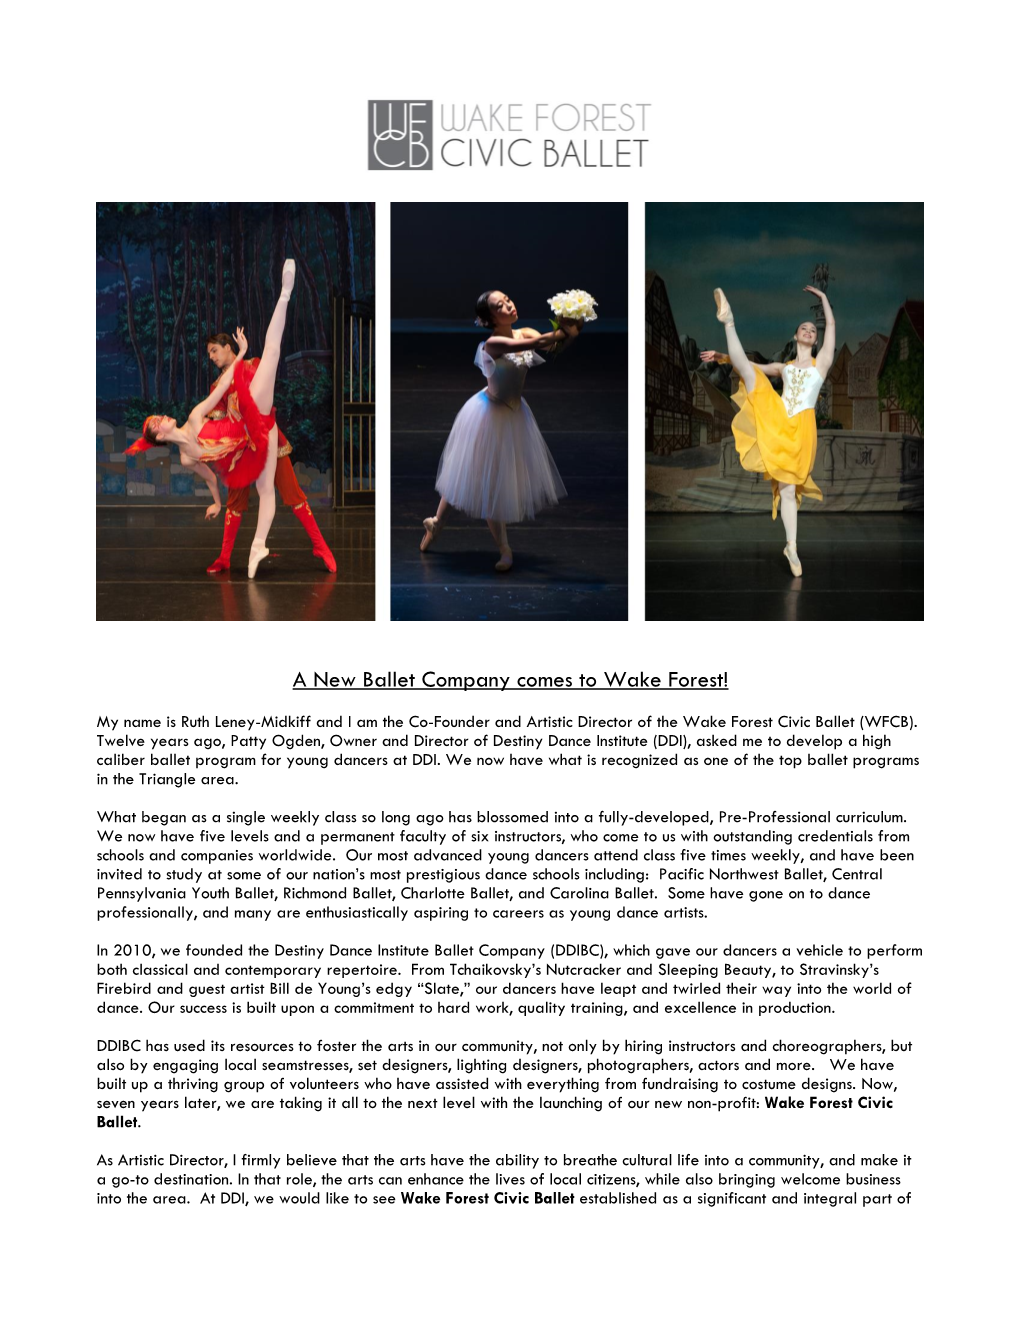 A New Ballet Company Comes to Wake Forest!